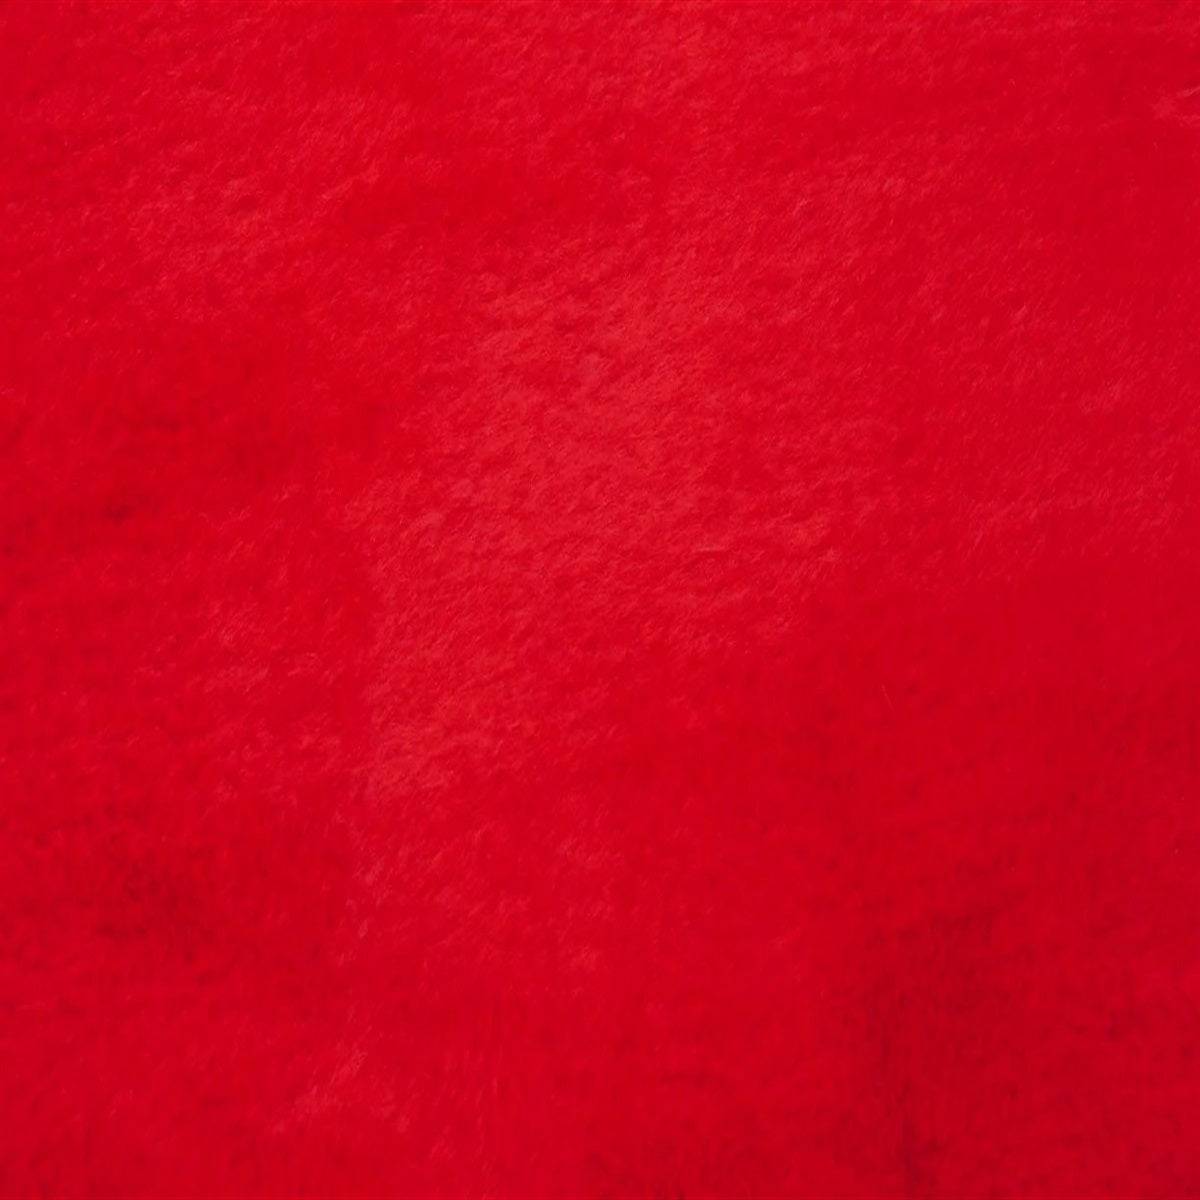 Bunny Thick Minky Fabric By The Roll (20 Yards)ICE FABRICSICE FABRICSRedBy The Yard (60 inches Wide)Bunny Thick Minky Fabric By The Roll (20 Yards) ICE FABRICS Red